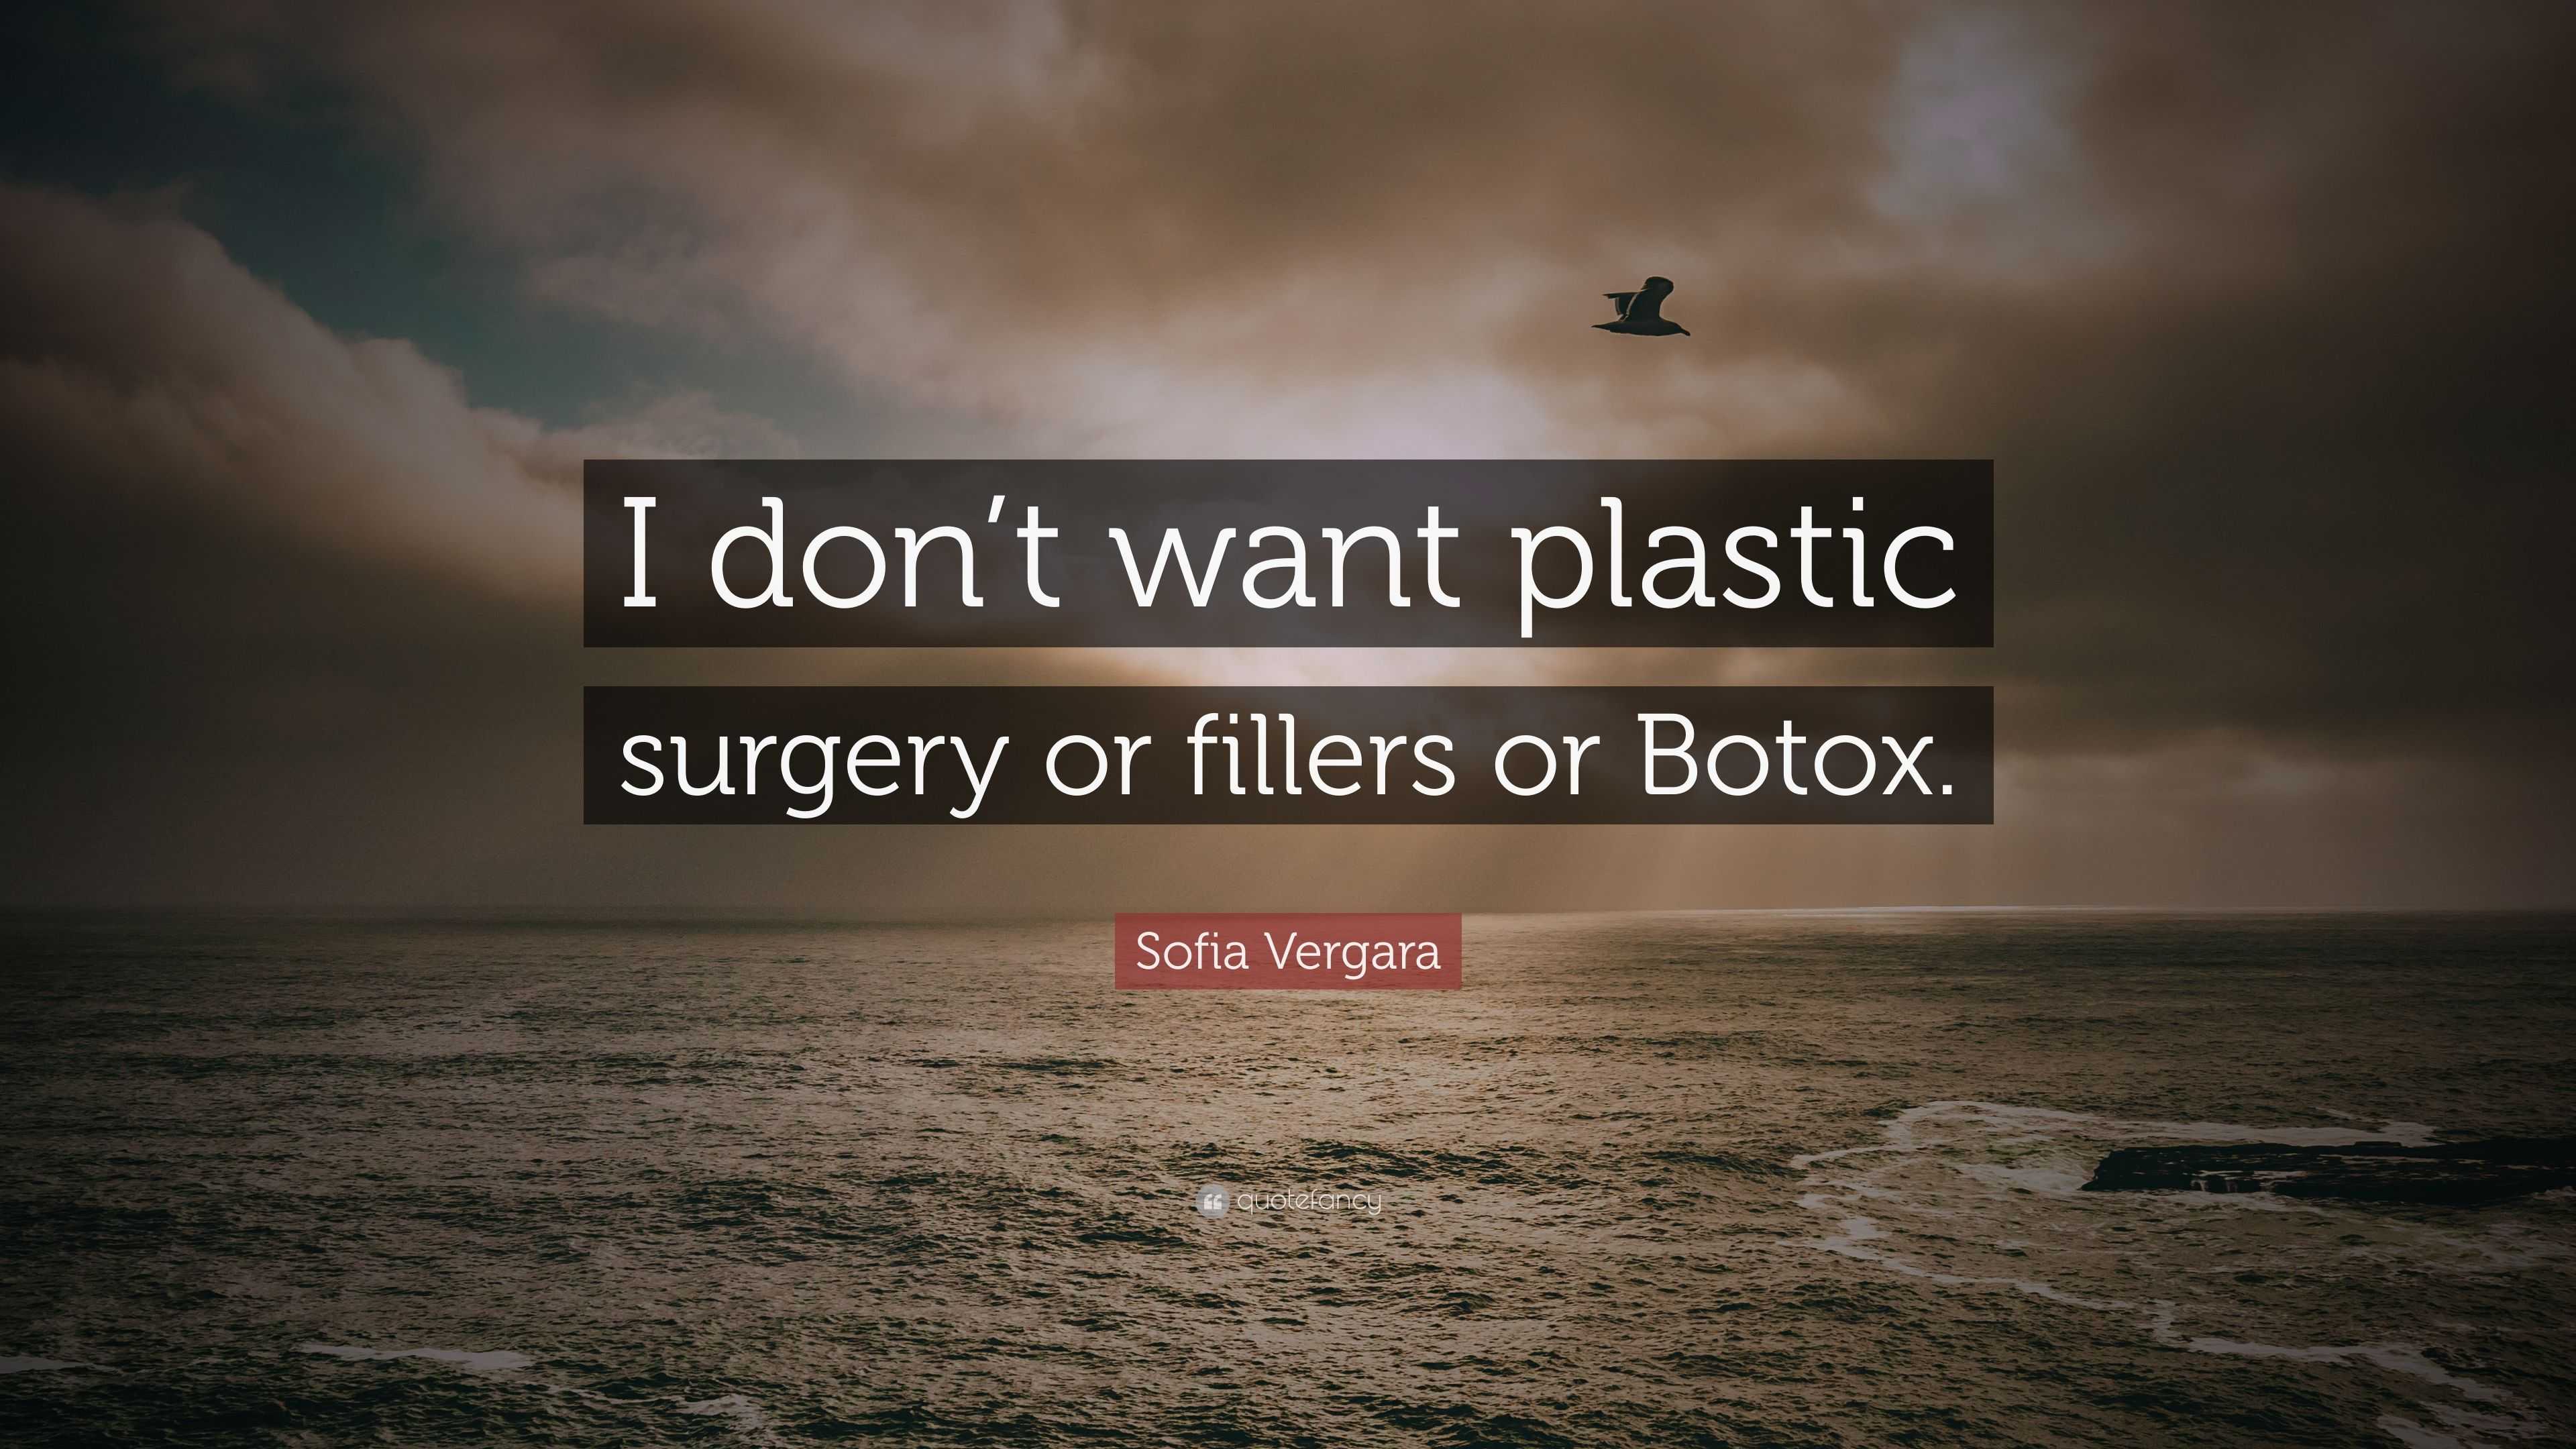 Sofia Vergara Quote “I don’t want plastic surgery or